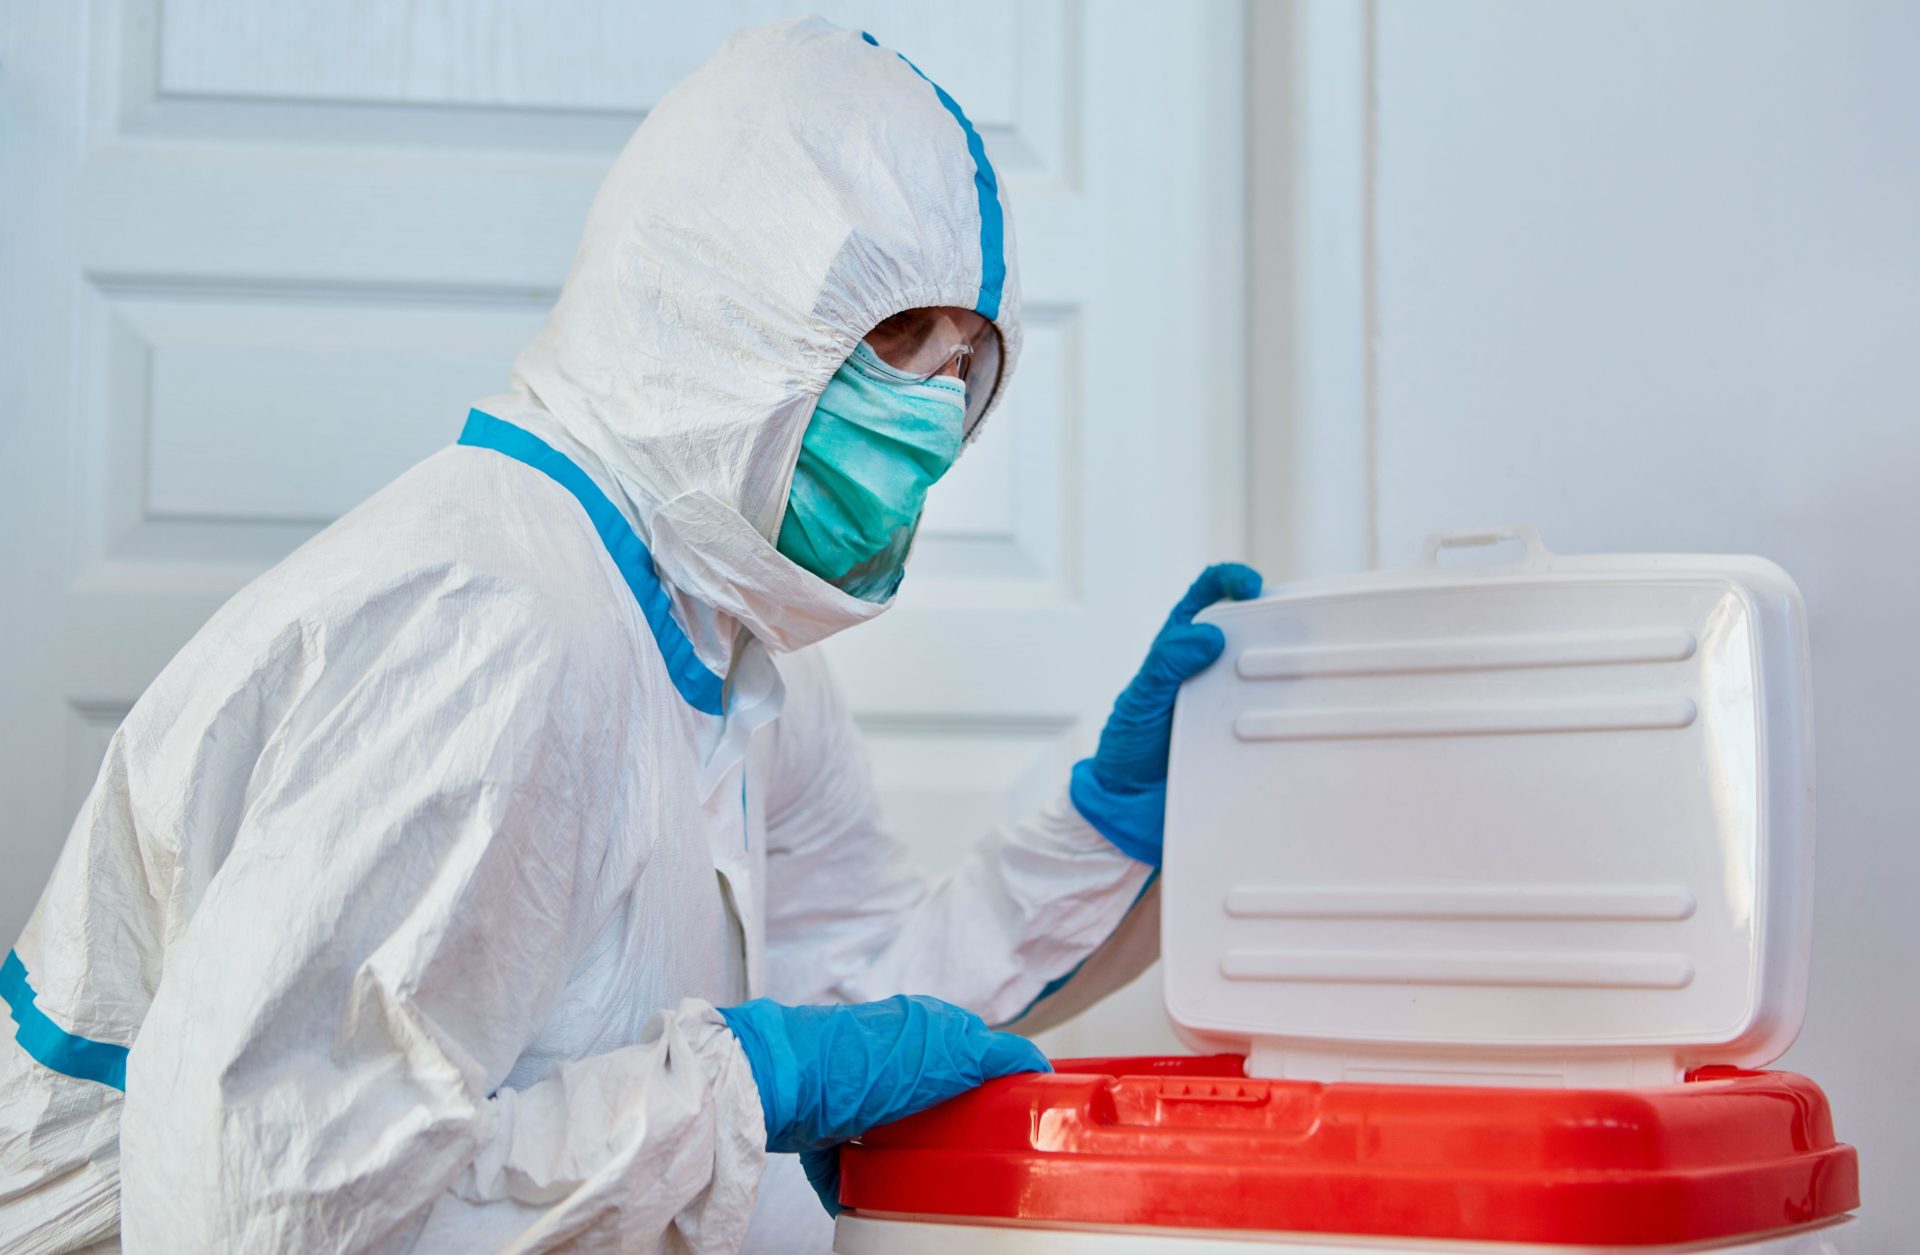 A surgeon in protective clothing with an organ donation in a box for transport, 23-4-20.